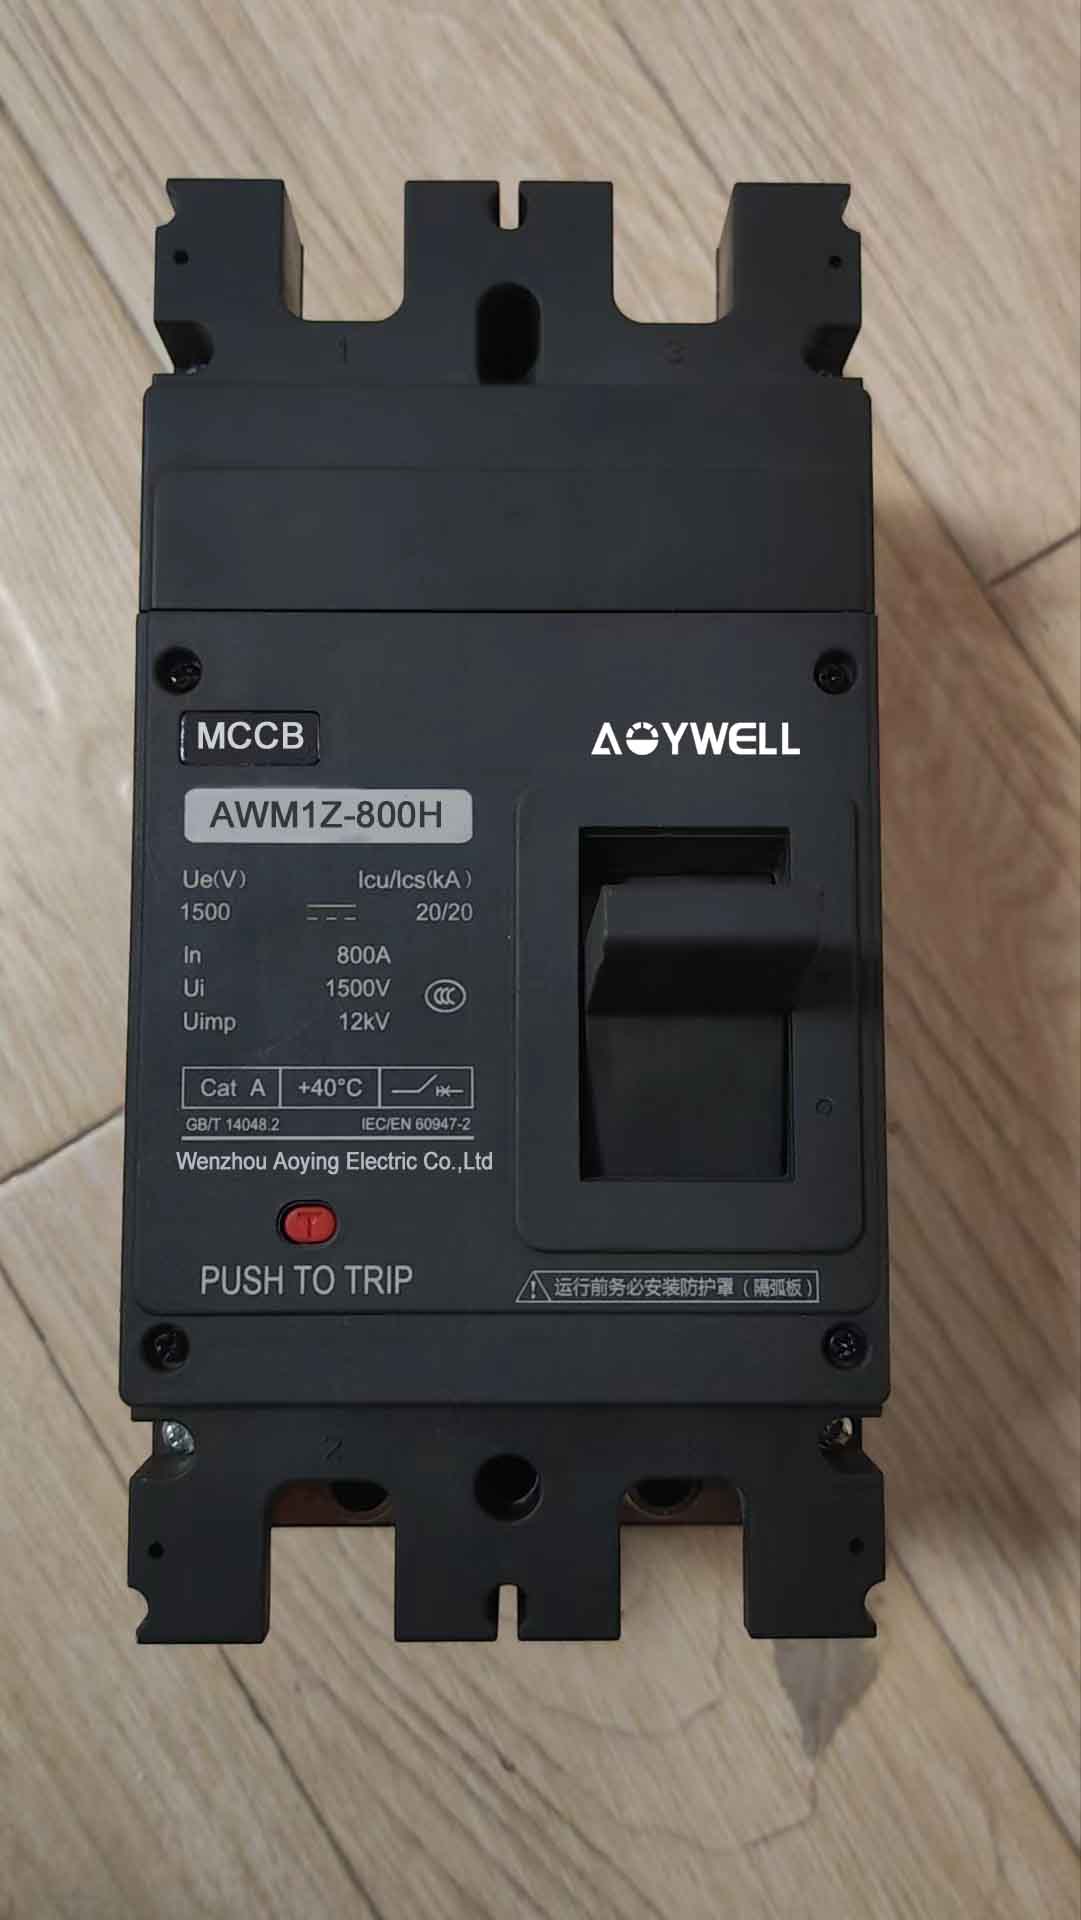 AOYWELL new 2P DC 1500V 800A MCCB for solar system hybrid syste, battery system Successfully listed